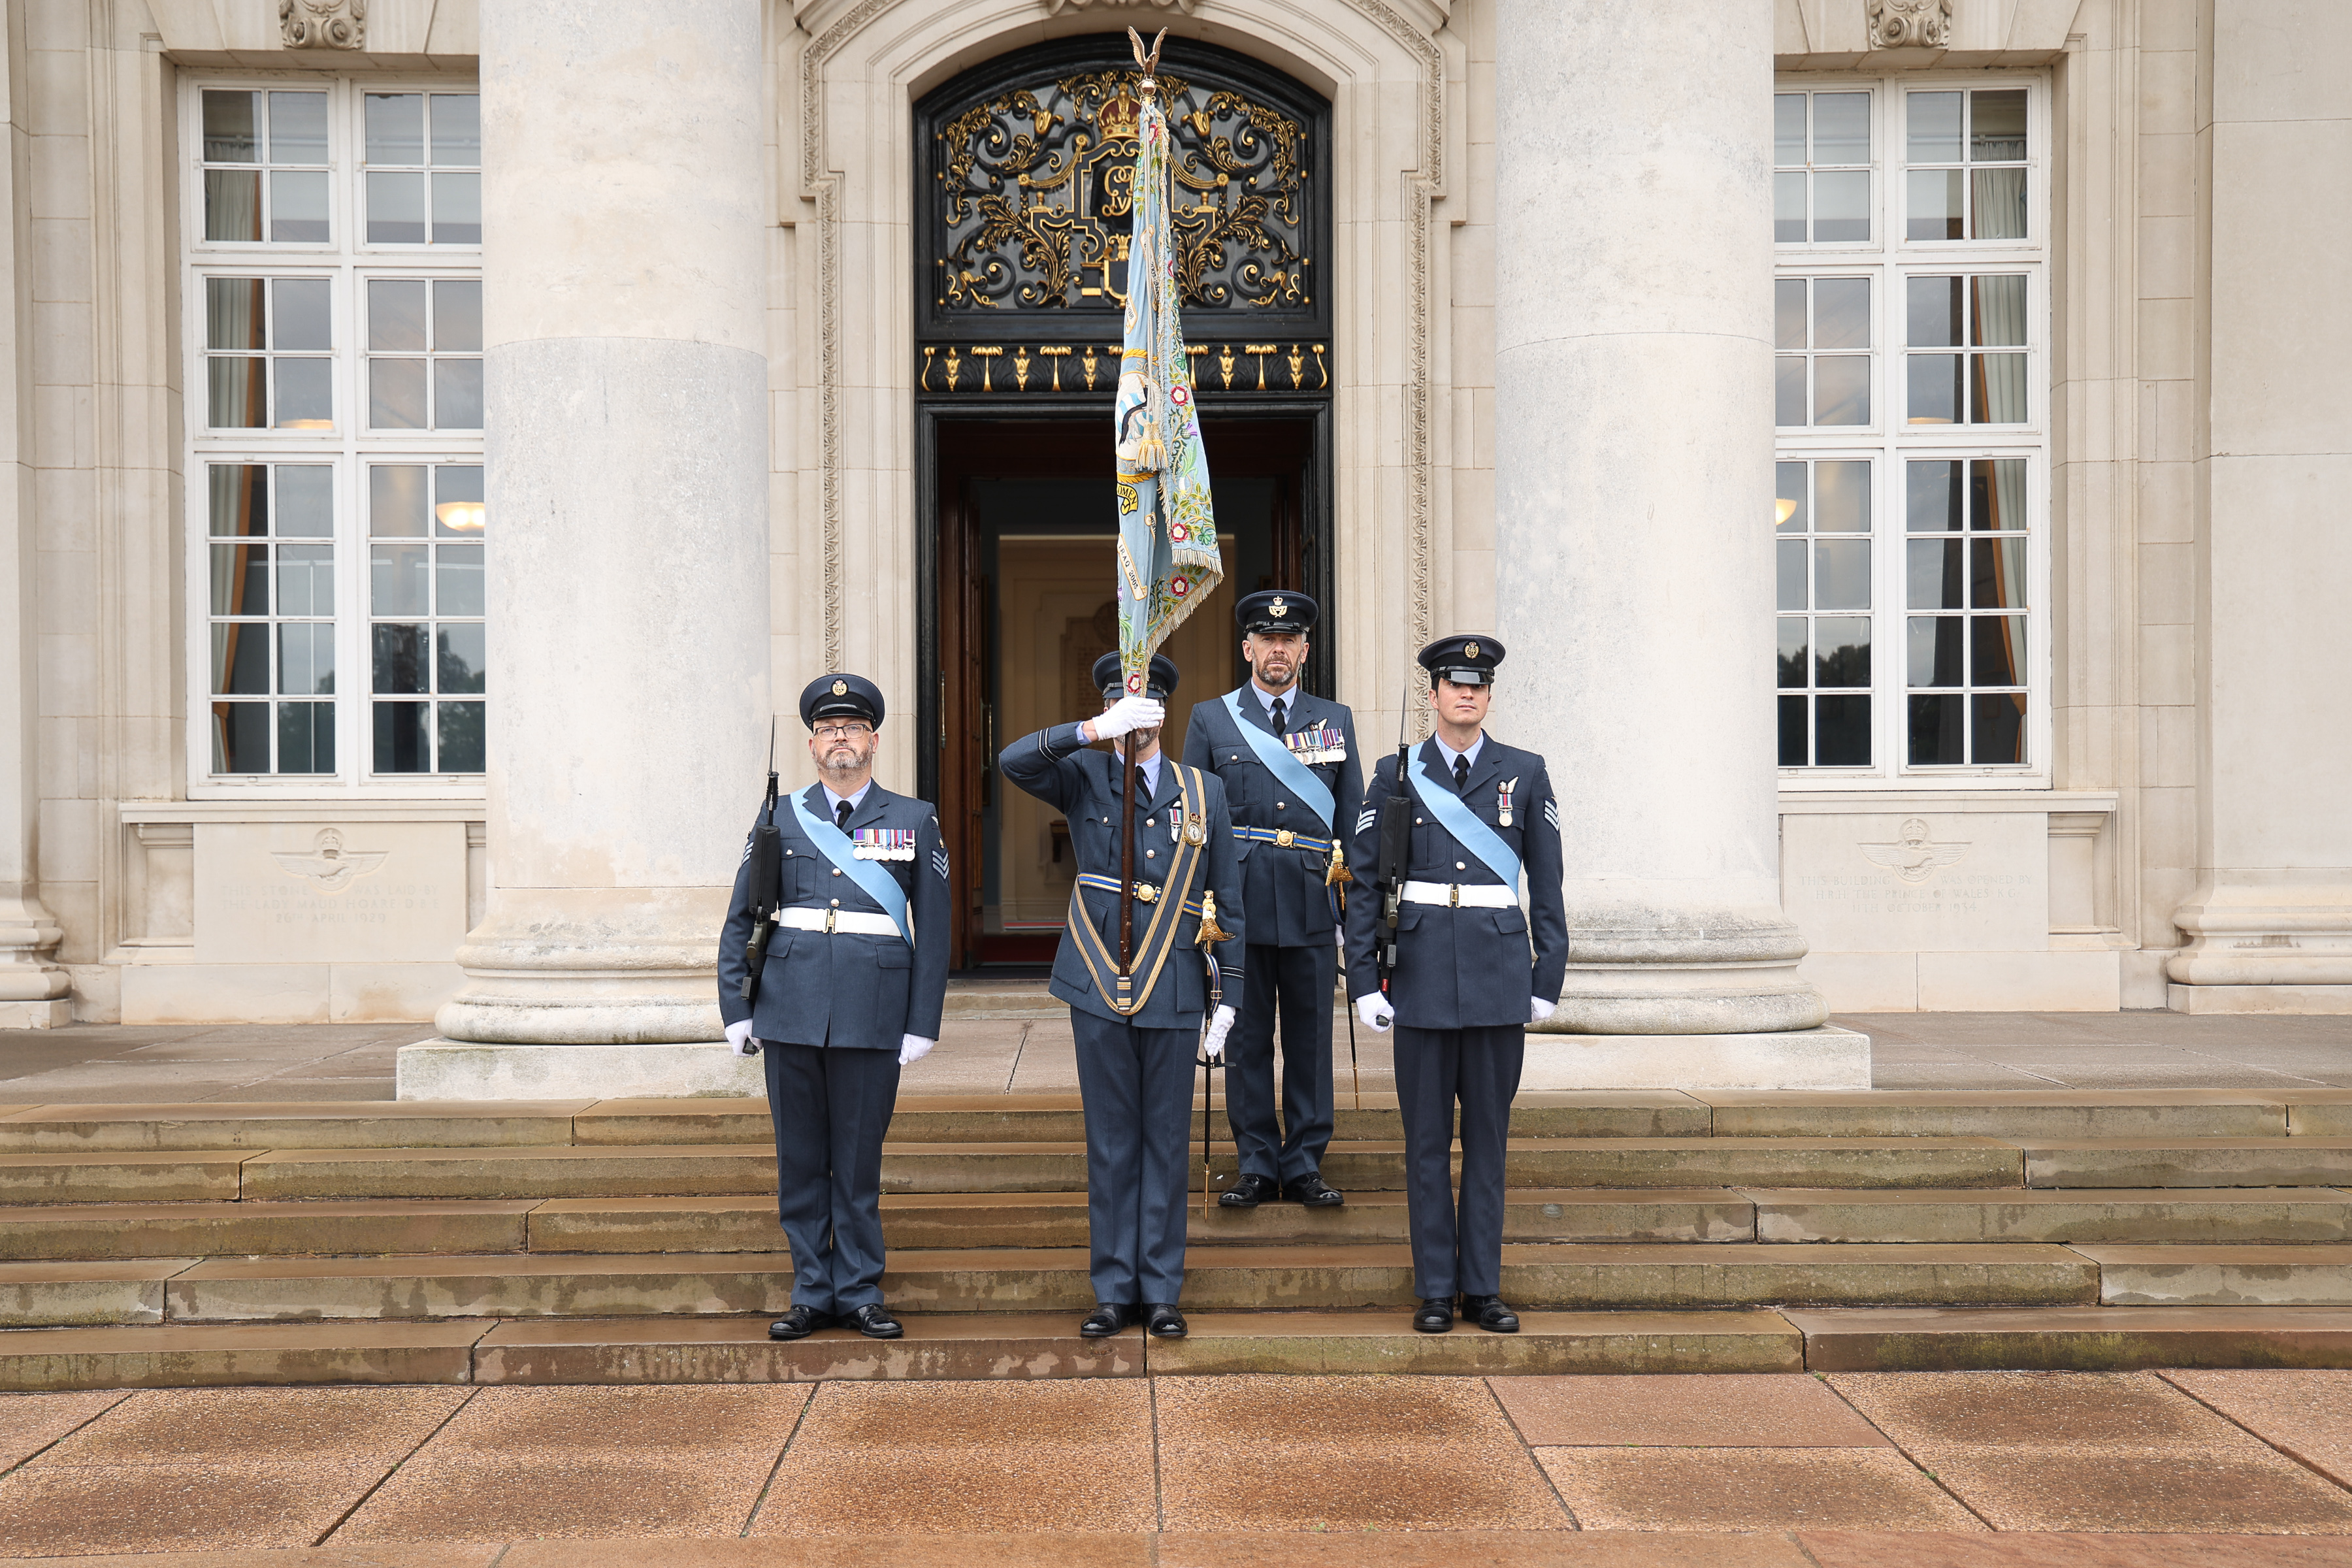 No.47 Squadron standard presented outside College Hall with a guard of 3 ceremonial personnel